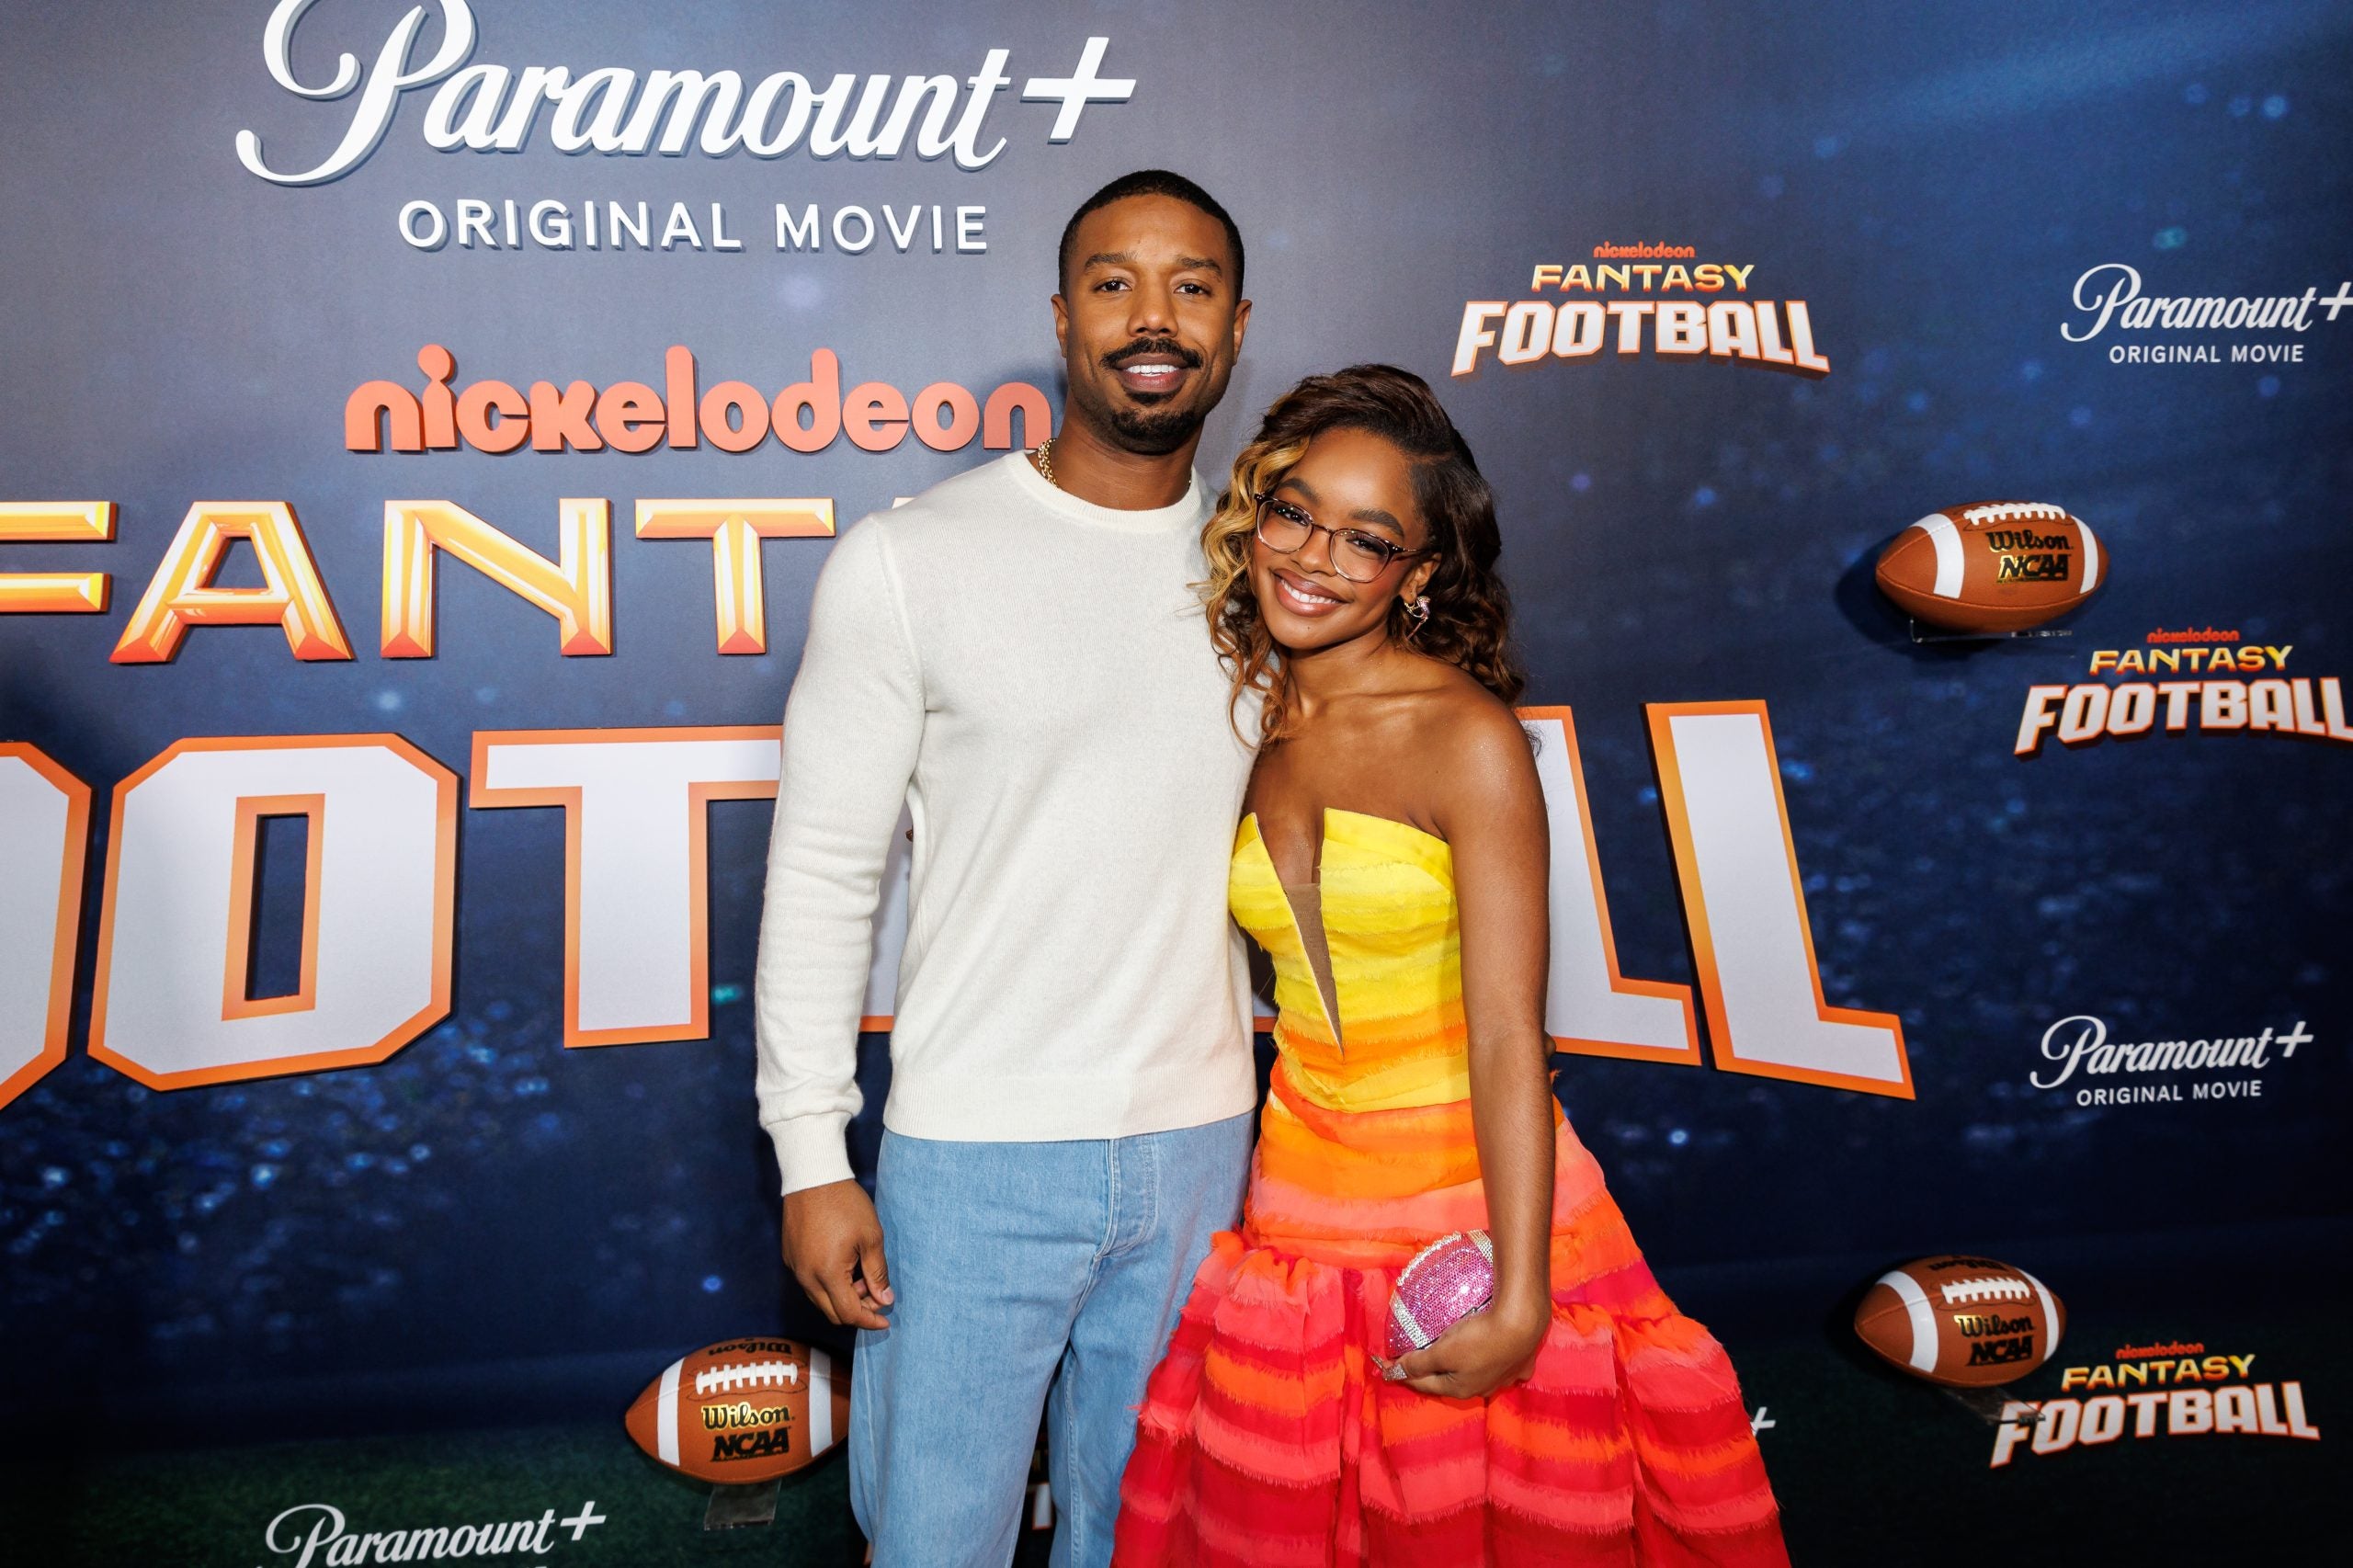 Star Gazing: Celebs Geared Up For The Holidays In Style At The Premiere of 'Fantasy Football,' Complexcon & More